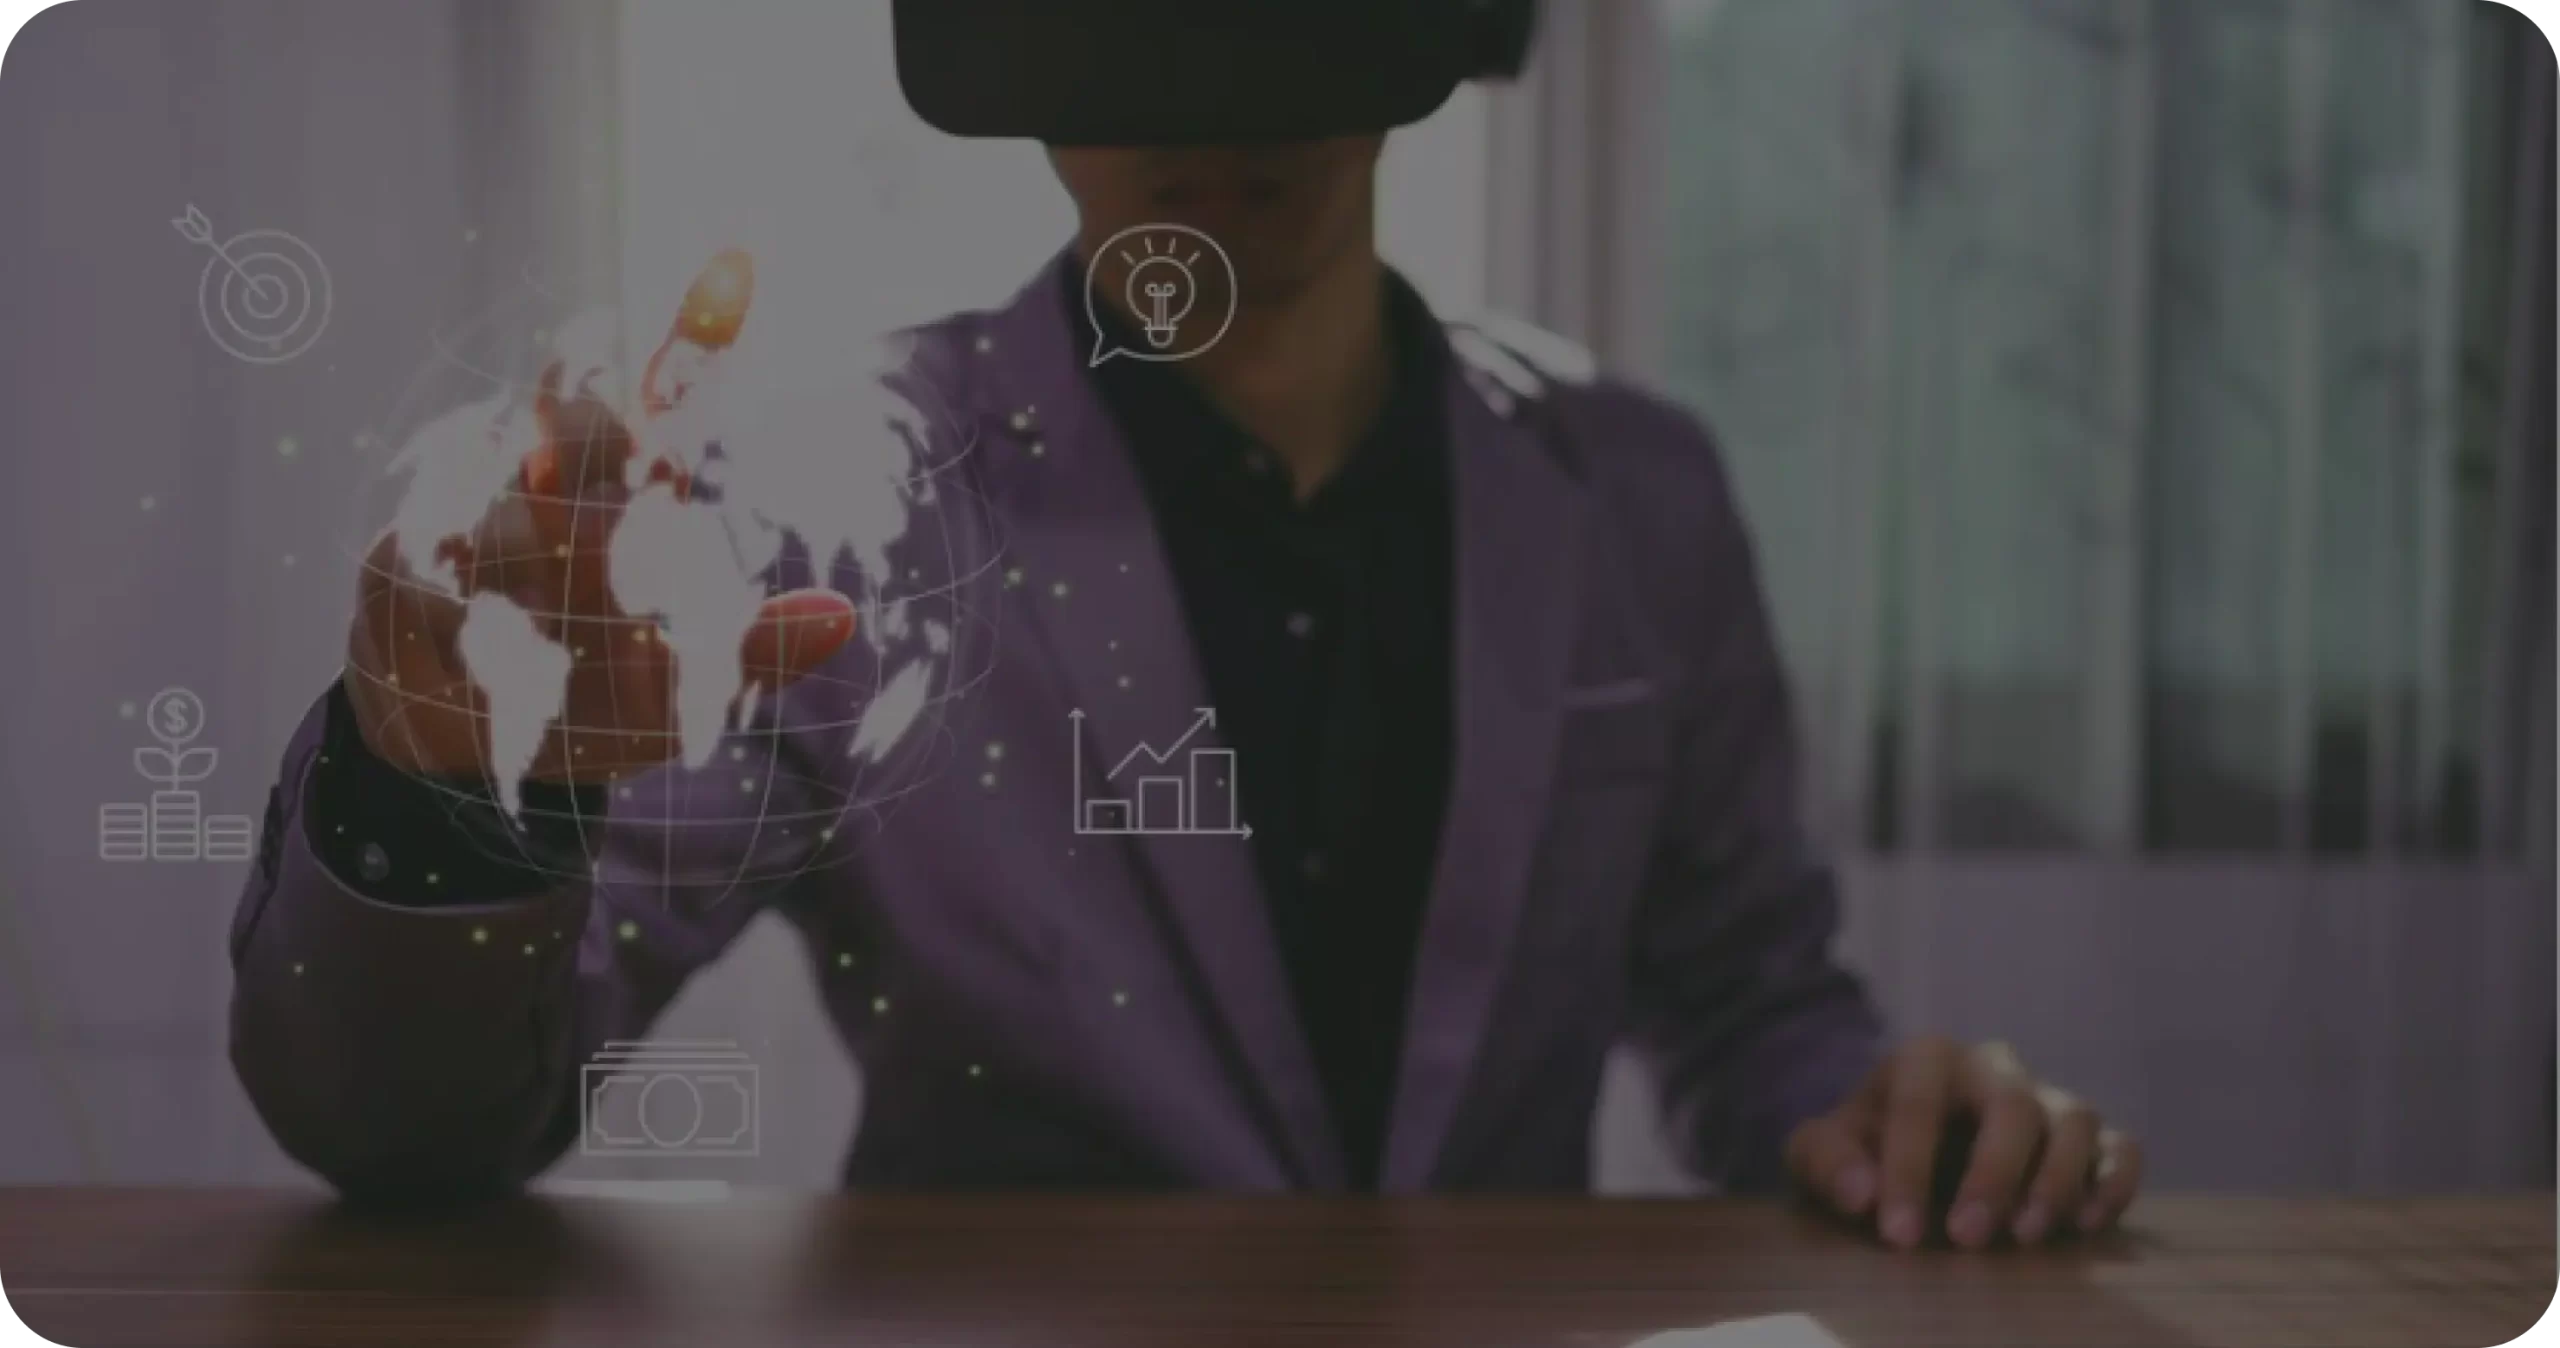 Efficient-and-cost-effective-solutions-to-solve-your-problems-with-augmented-reality-ar-vr-services